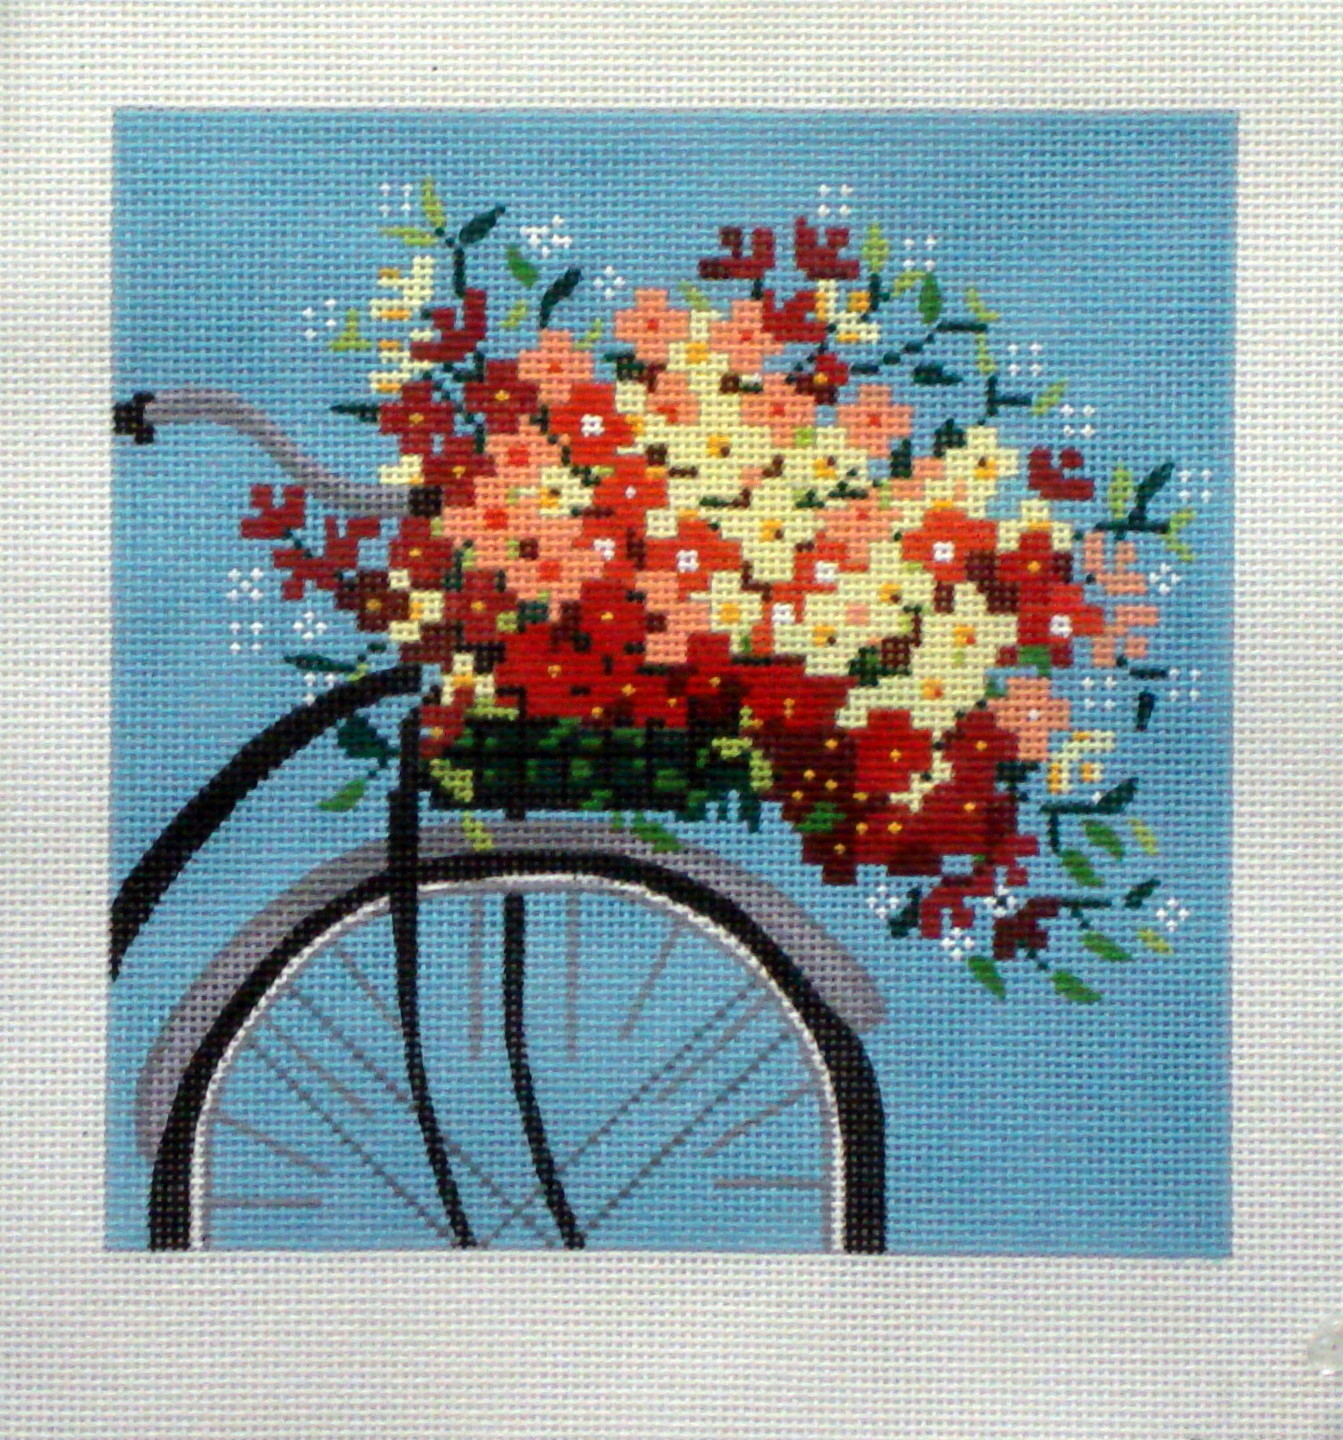 Bicycle on Blue (Handpainted by Alice Peterson Company)
*Product may take longer than usual to arrive*